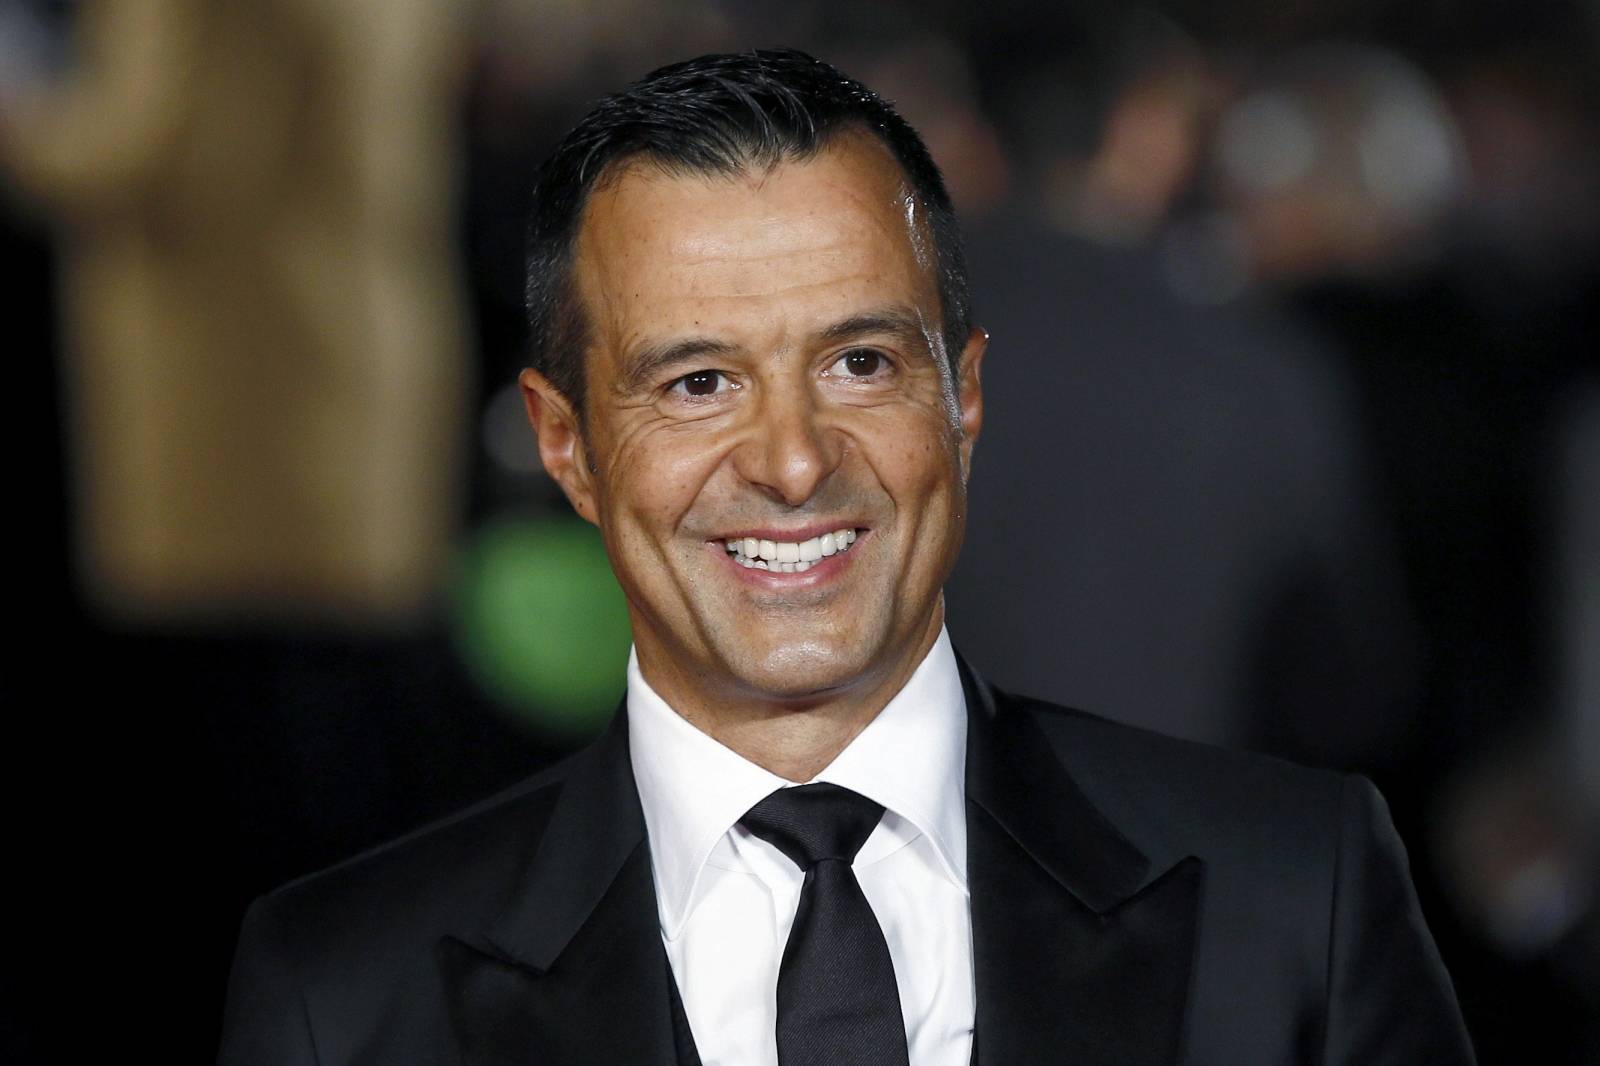 FILE PHOTO: Agent Jorge Mendes poses for photographers on the red carpet at the world premiere of "Ronaldo" at Leicester Square in London